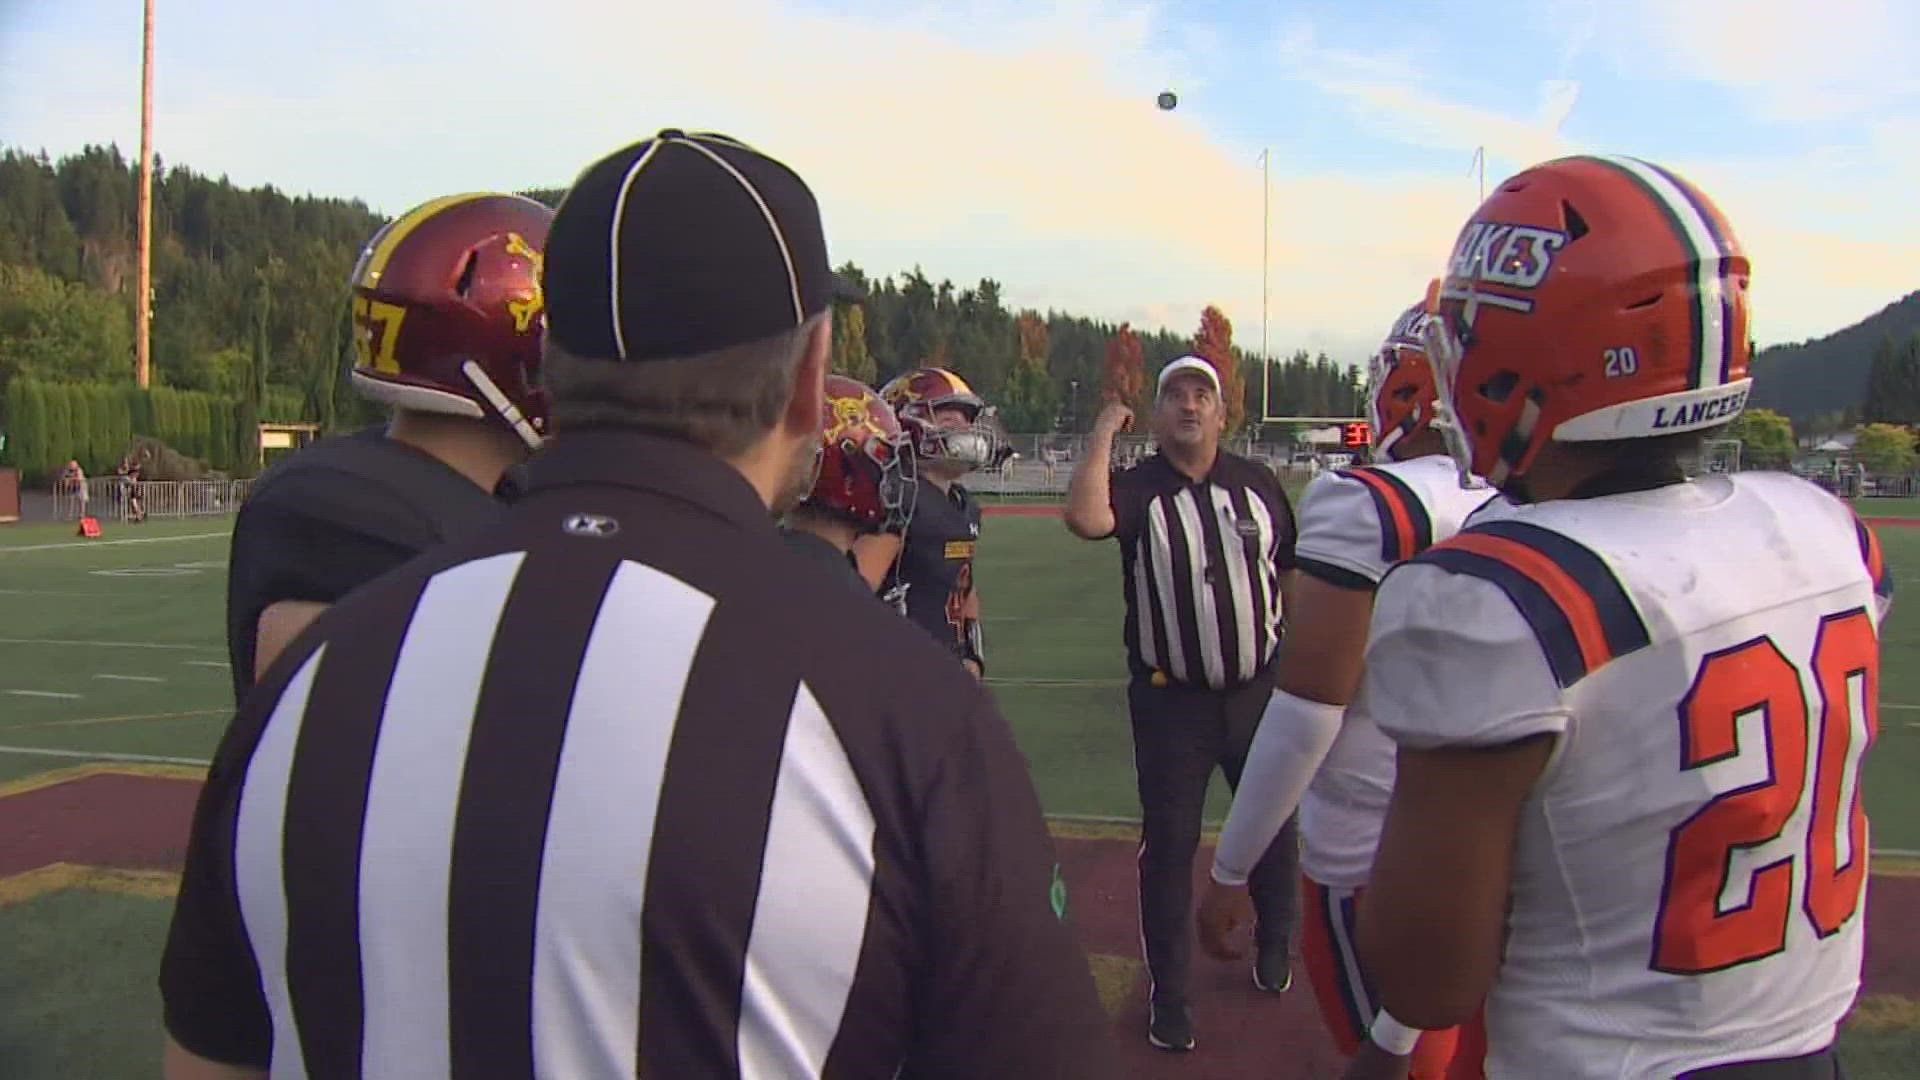 The Washington Officials Association said a shortage of school sports referees is a problem across the state.